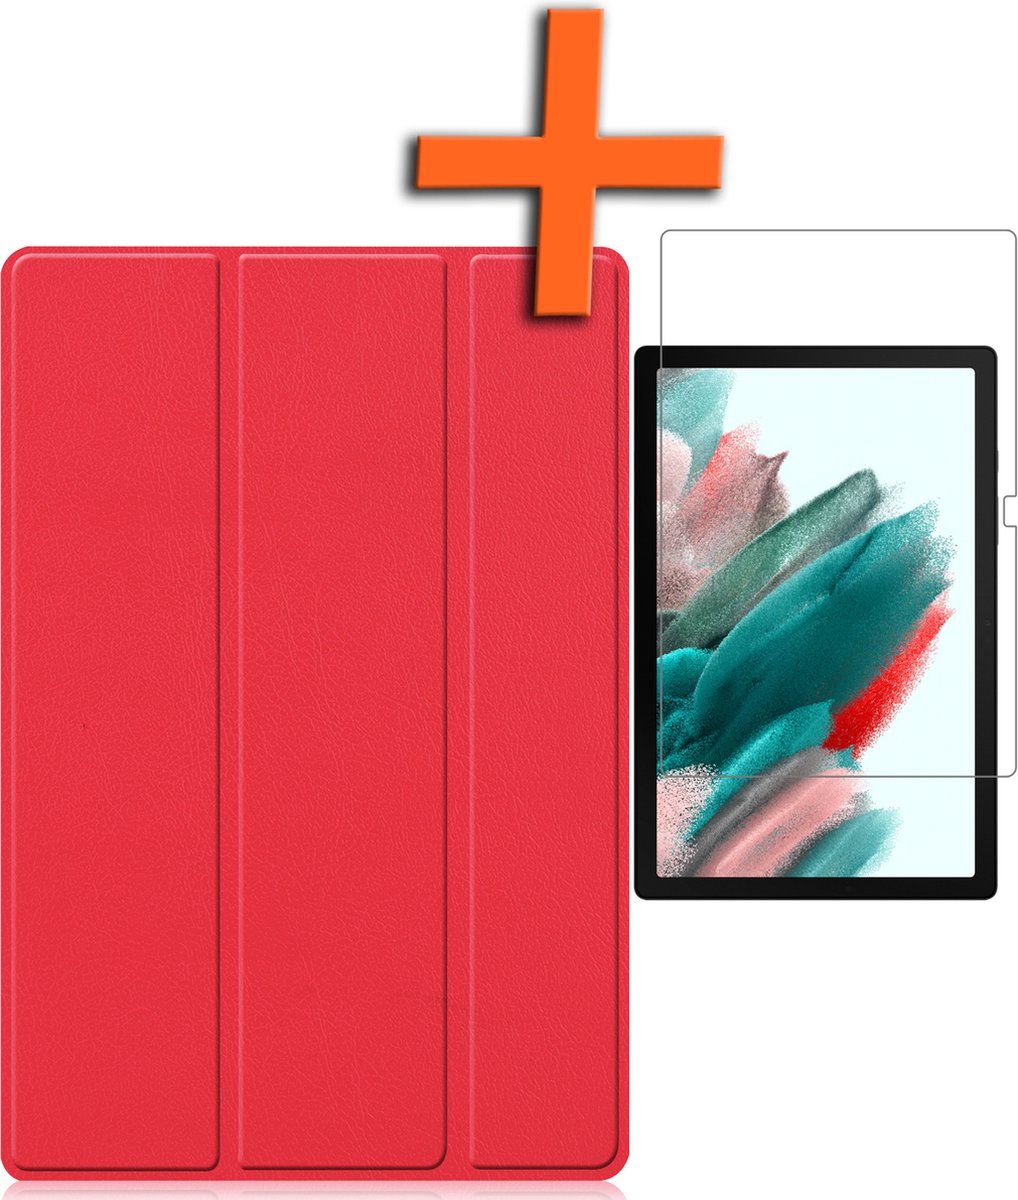 Hoes Geschikt voor Samsung Galaxy Tab A8 Hoes Tri-fold Tablet Hoesje Case Met Screenprotector - Hoesje Geschikt voor Samsung Tab A8 Hoesje Hardcover Bookcase - Rood.